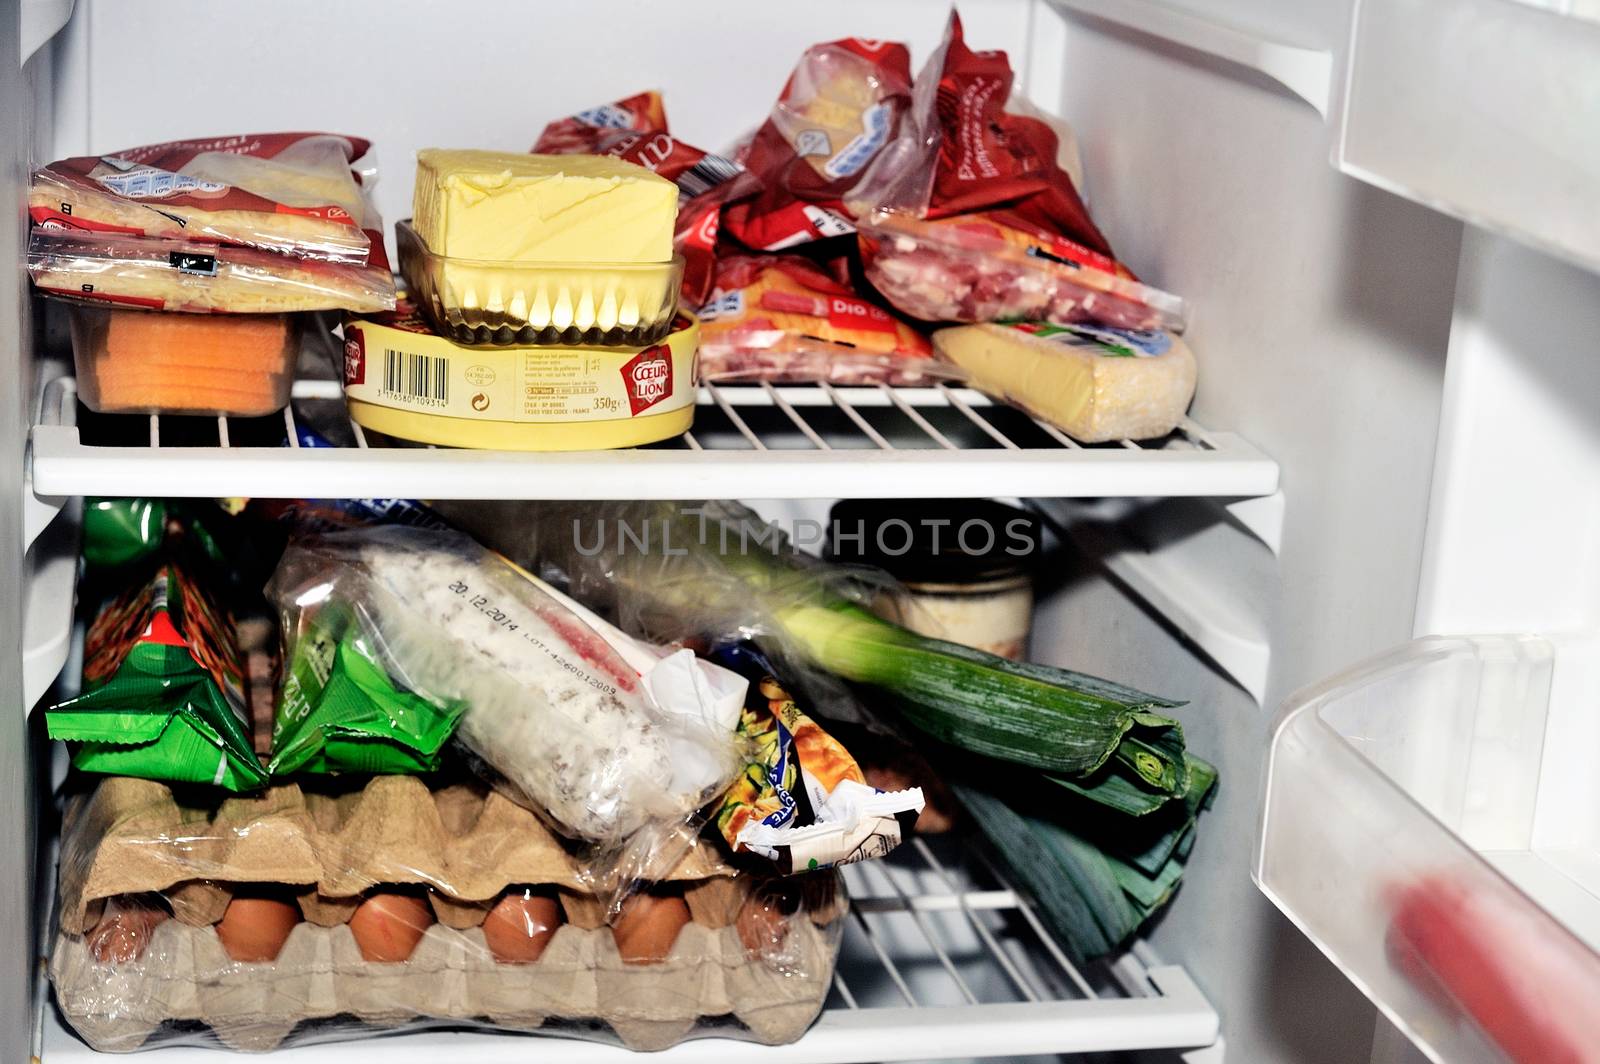 Open refrigerator containing food products each day by gillespaire